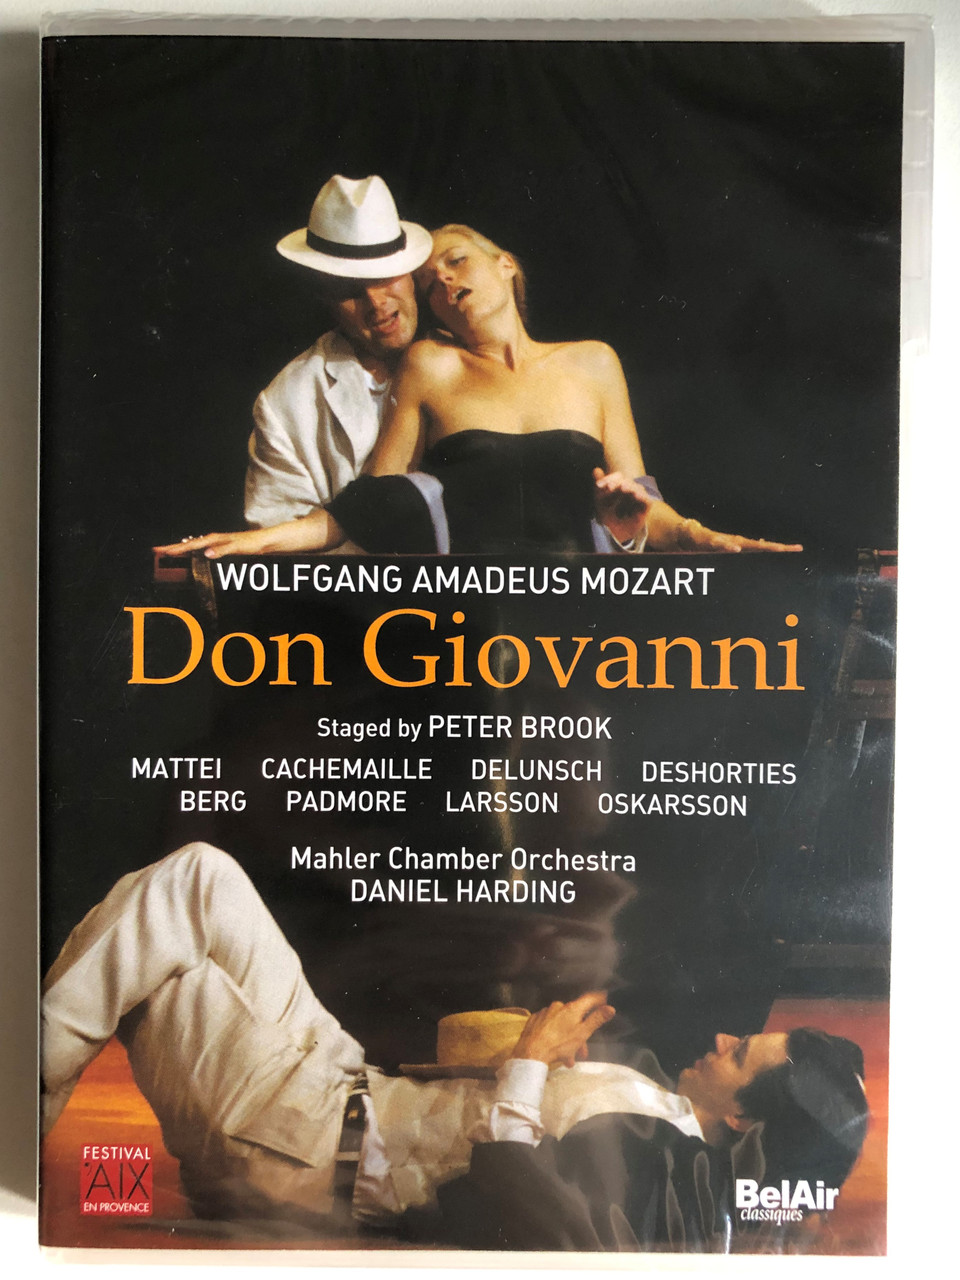 Mozart_-_Don_Giovanni_Playful_drama_in_two_acts_Libretto_by_LORENZO_DA_PONTE_Mahler_Chamber_Orchestra_Conductor_DANIEL_HARDING_A_production_of_Festival_dAix-en-Provence_Pic___98197.1691725991.1280.1280.JPG (960×1280)